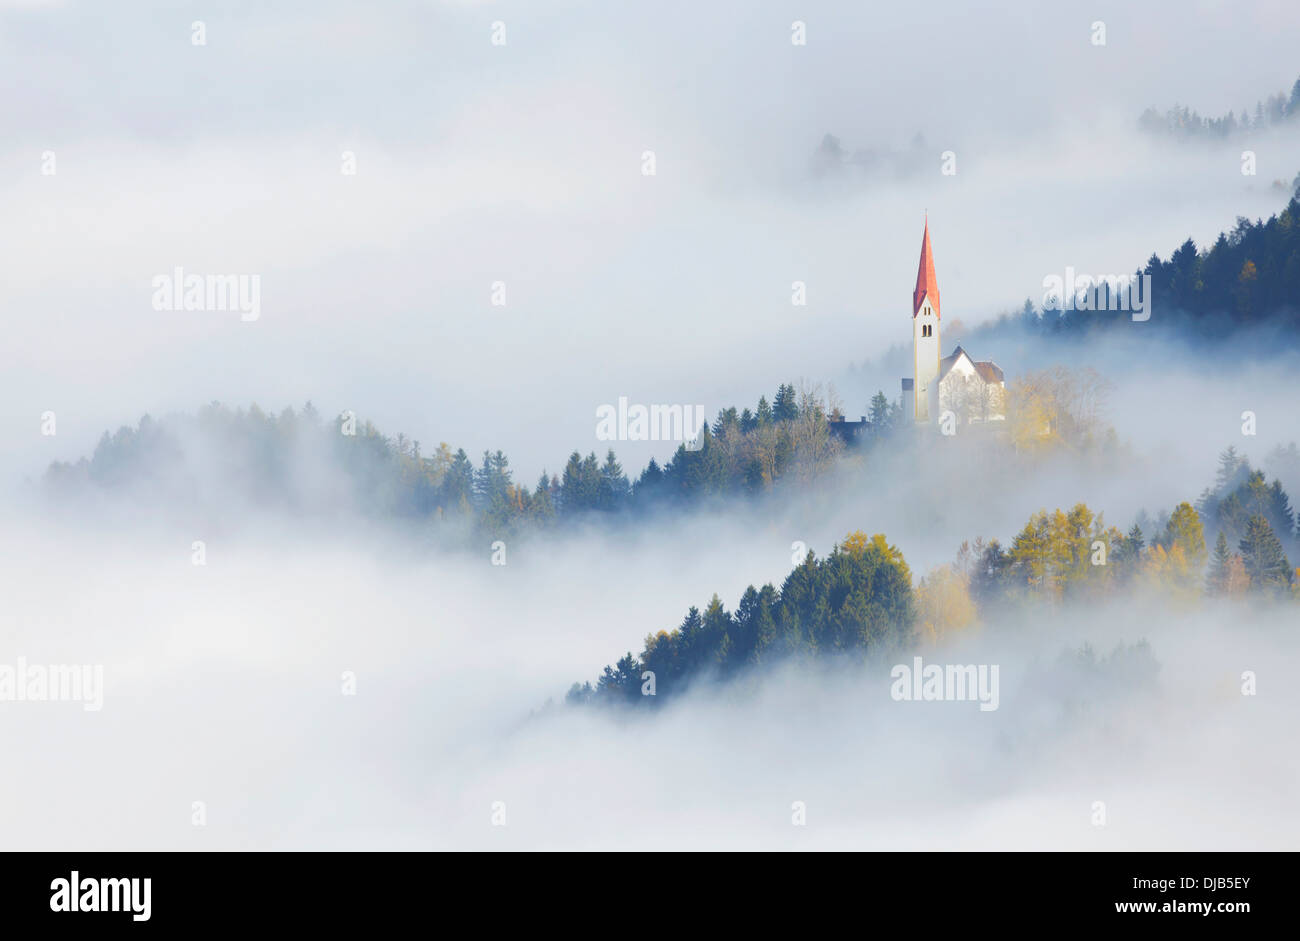 The Church of St. Peter in the fog, Weerberg, Tyrol, Austria Stock Photo